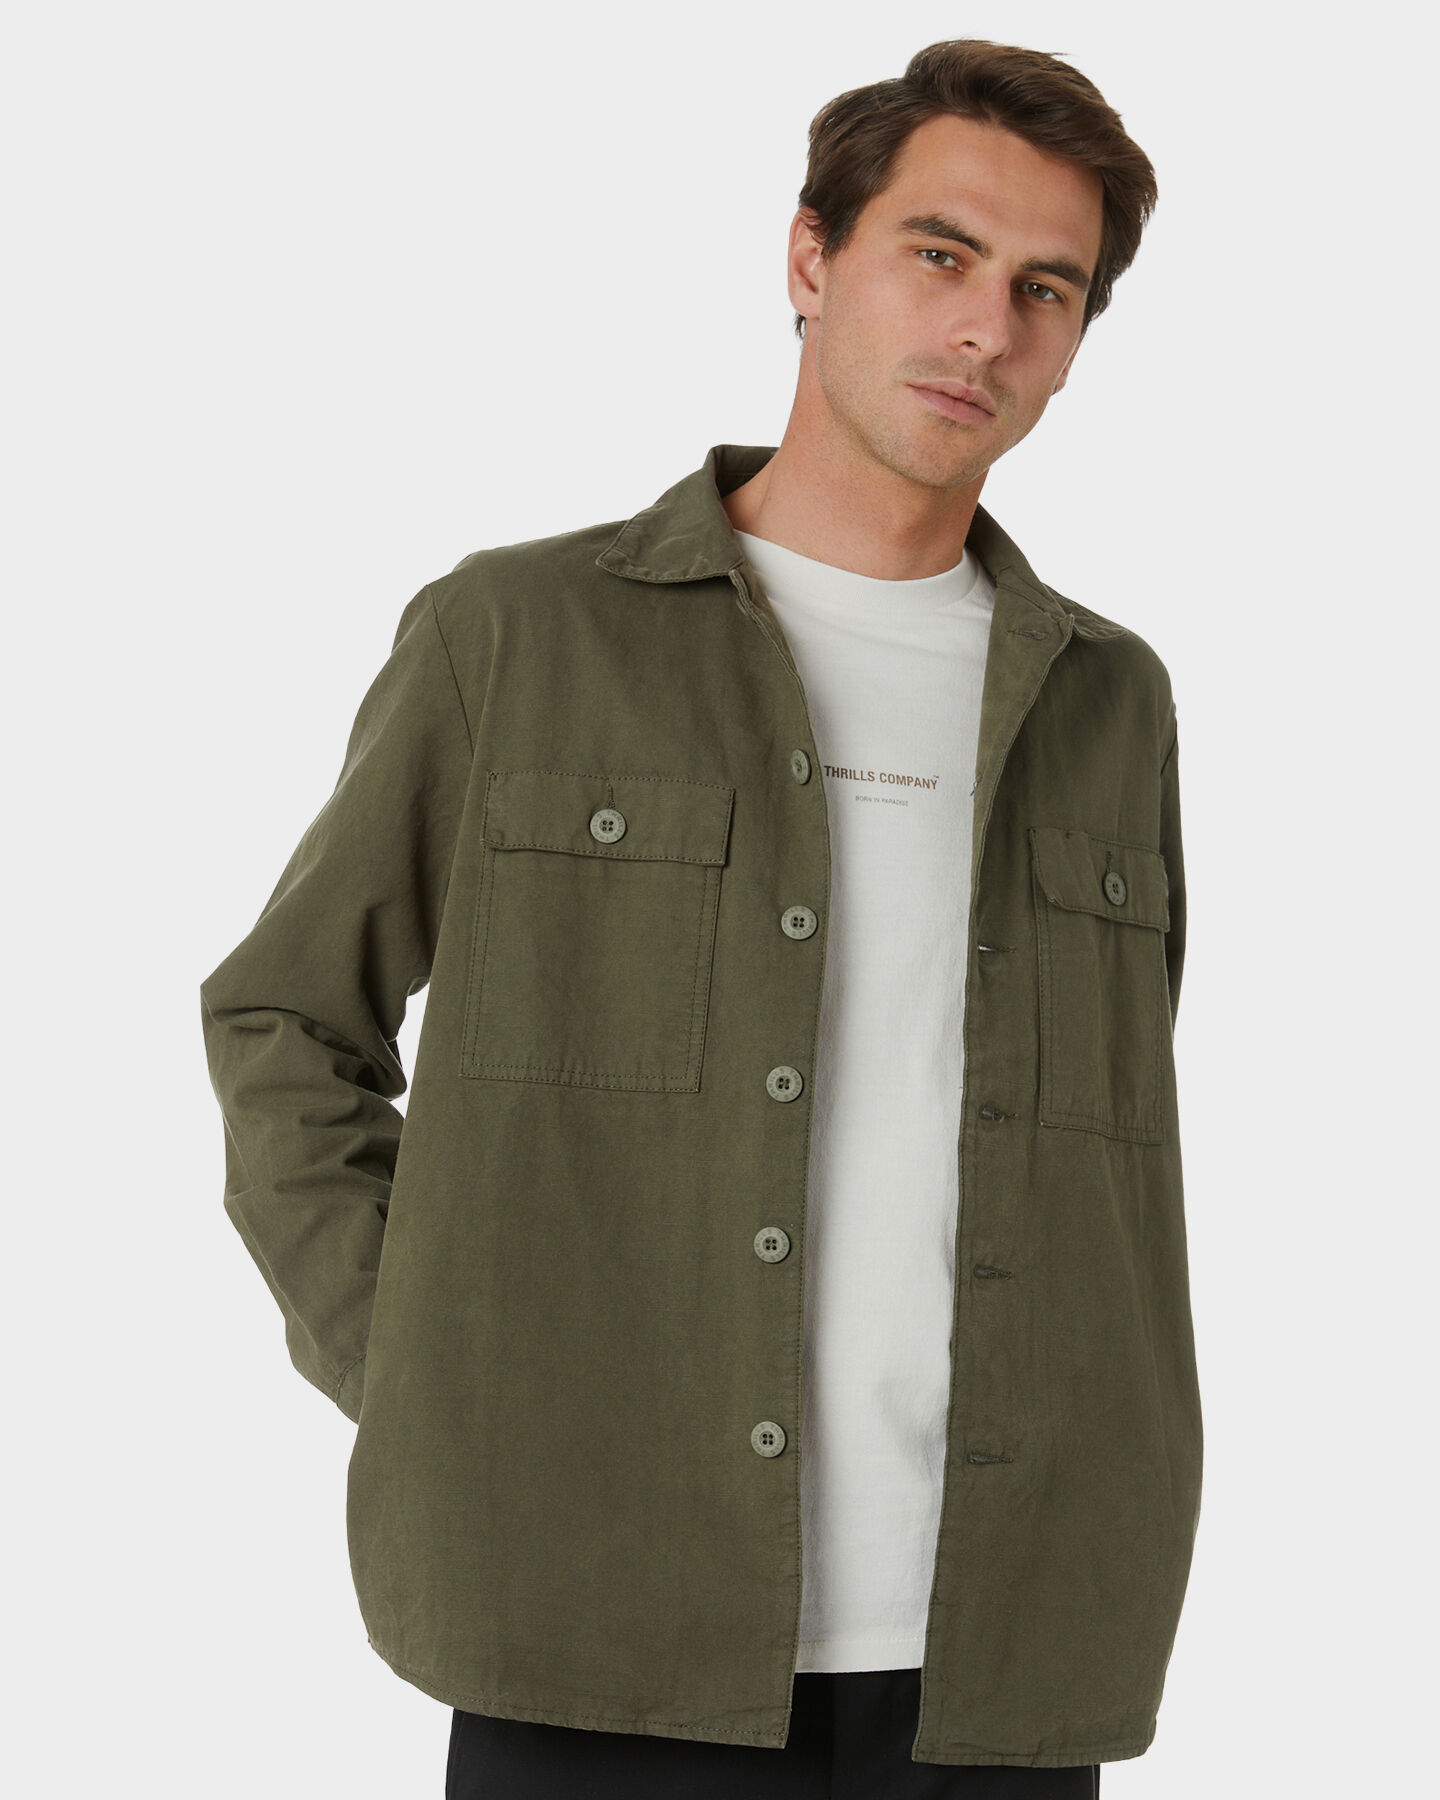 THRILLS Gift Selection Brigade Mens Overshirt sale & clearance | latest ...